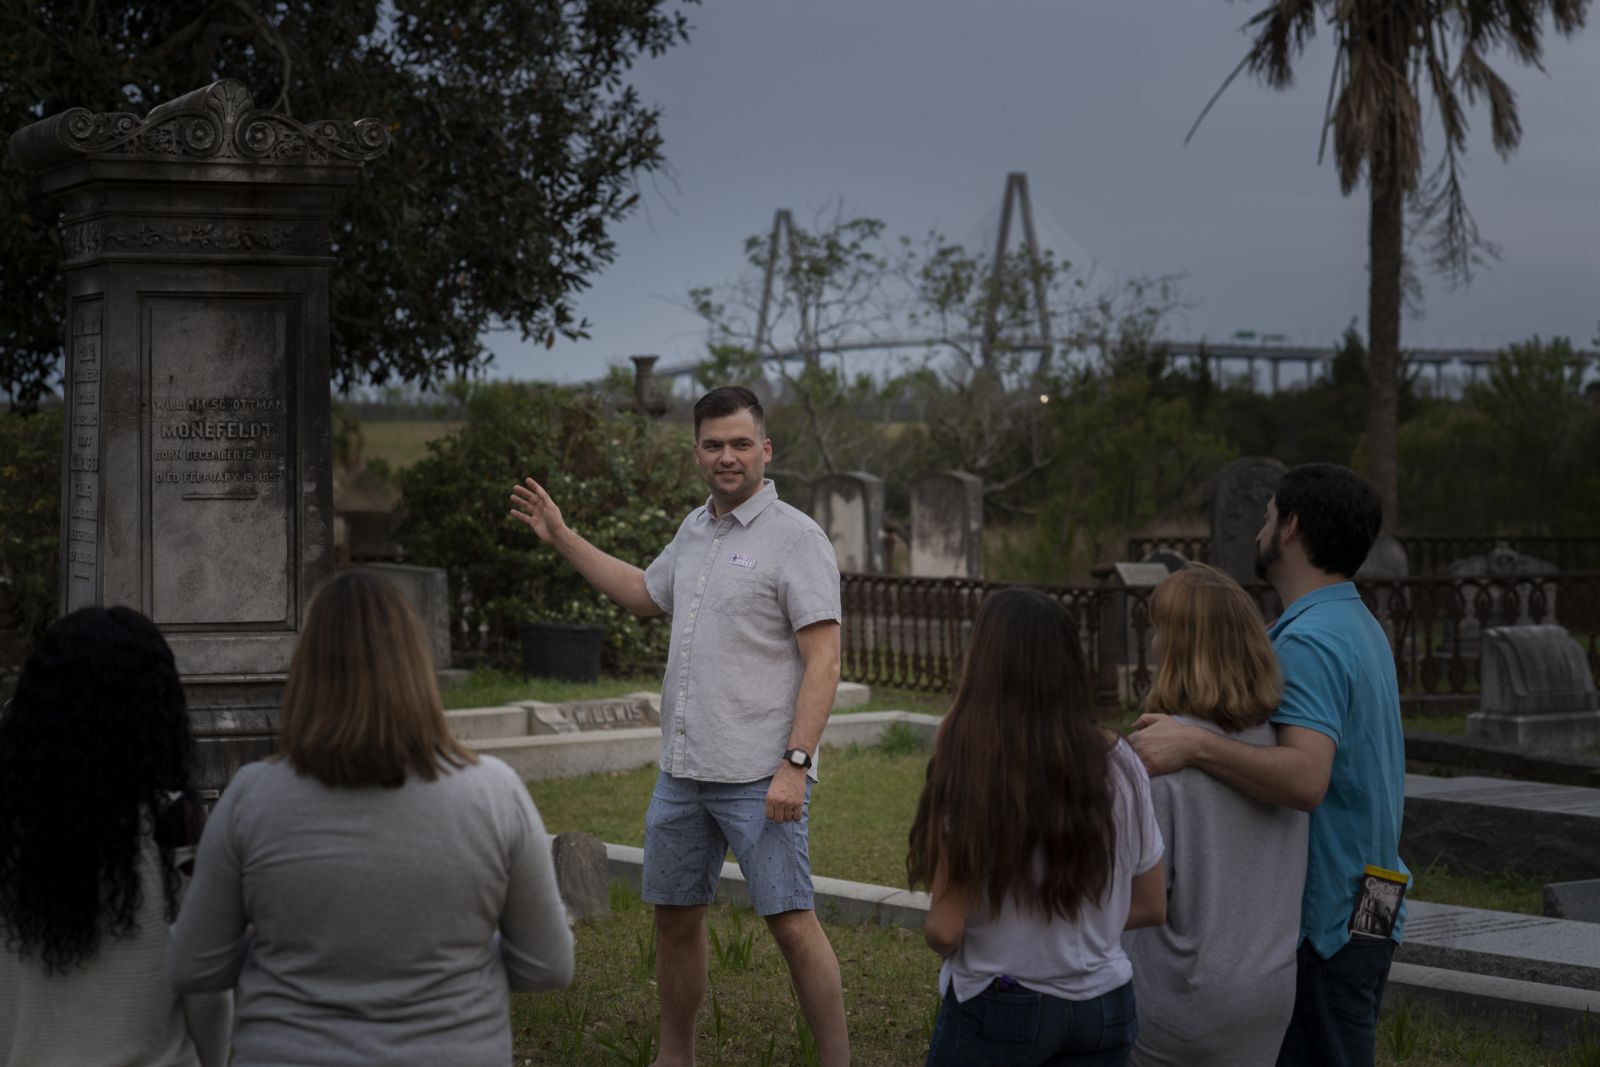 Bulldog Tours is launching the first official walking tour of Magnolia Cemetery this week. Charleston??s oldest public cemetery had previously been off limits to commercial tour companies. (Photo/Provided)